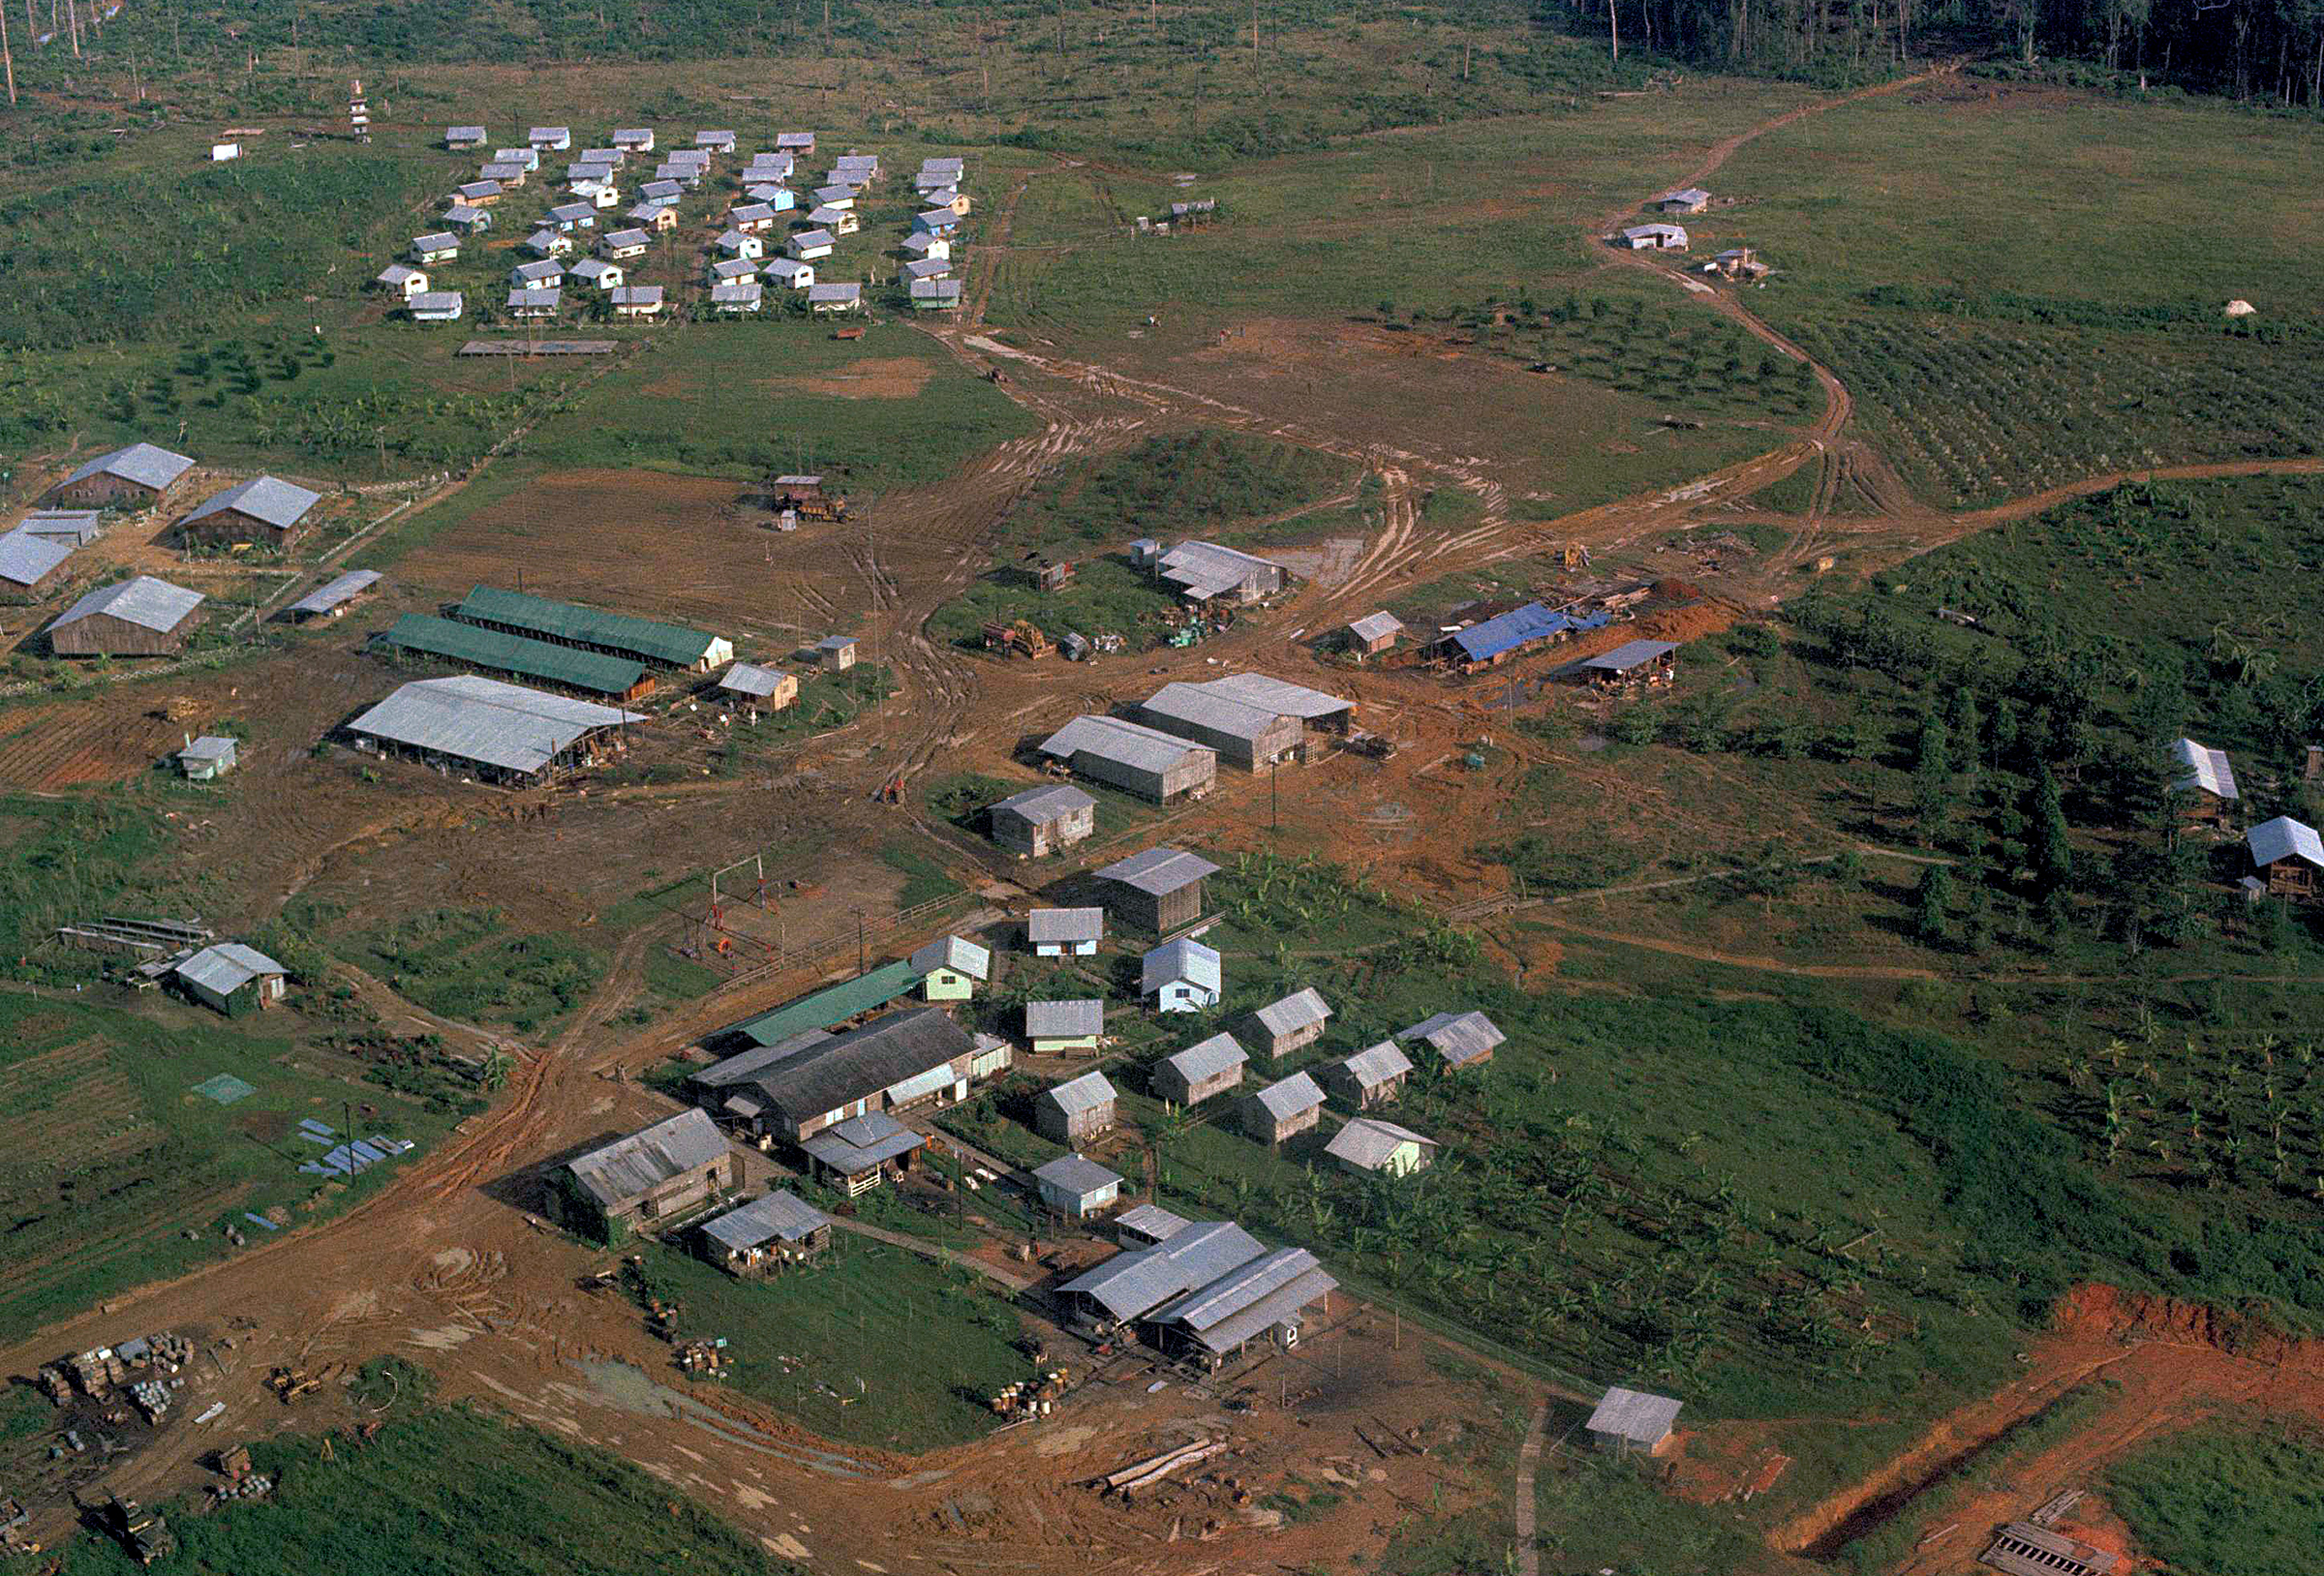 An aerial view of the Peoples Temple compound in Jonestown, Guyana in November 1978. (AP)